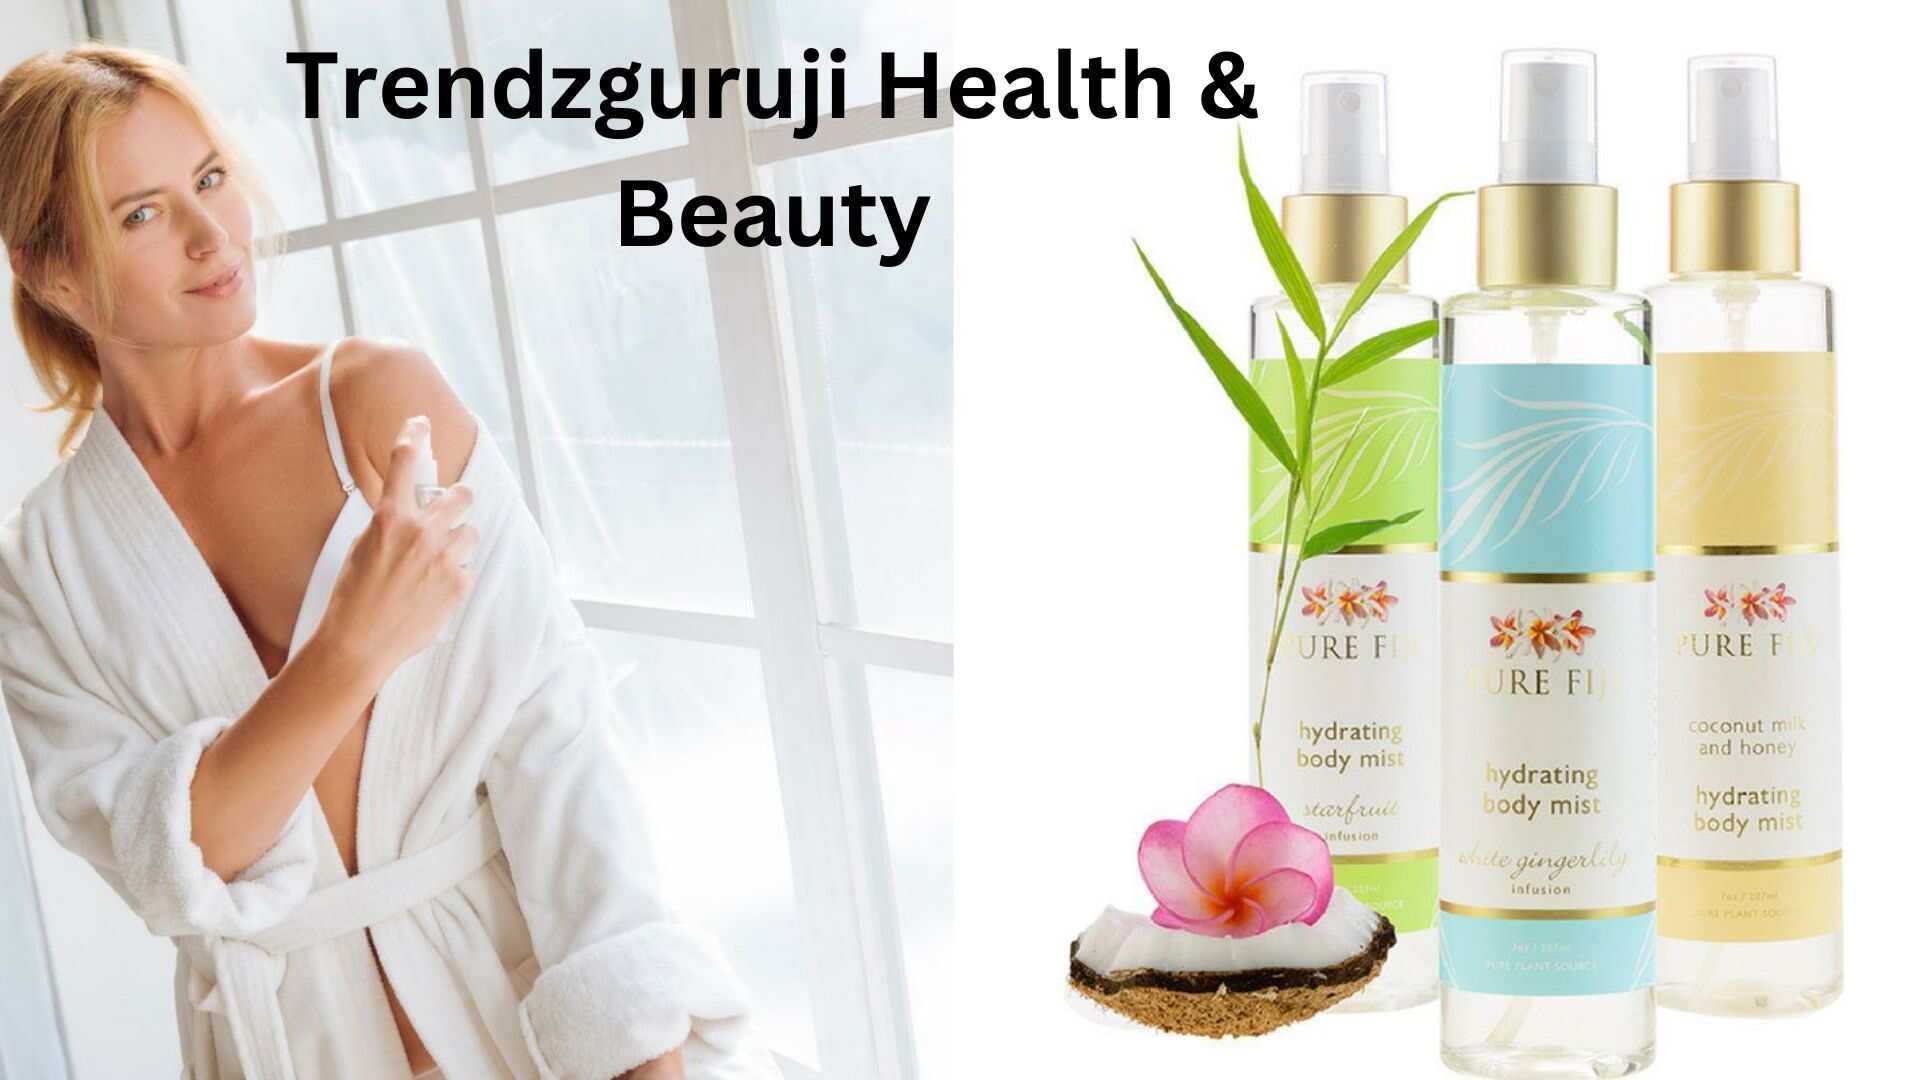 Trendzguruji Health & Beauty: Hub For The Formation And Generation Of Web Information